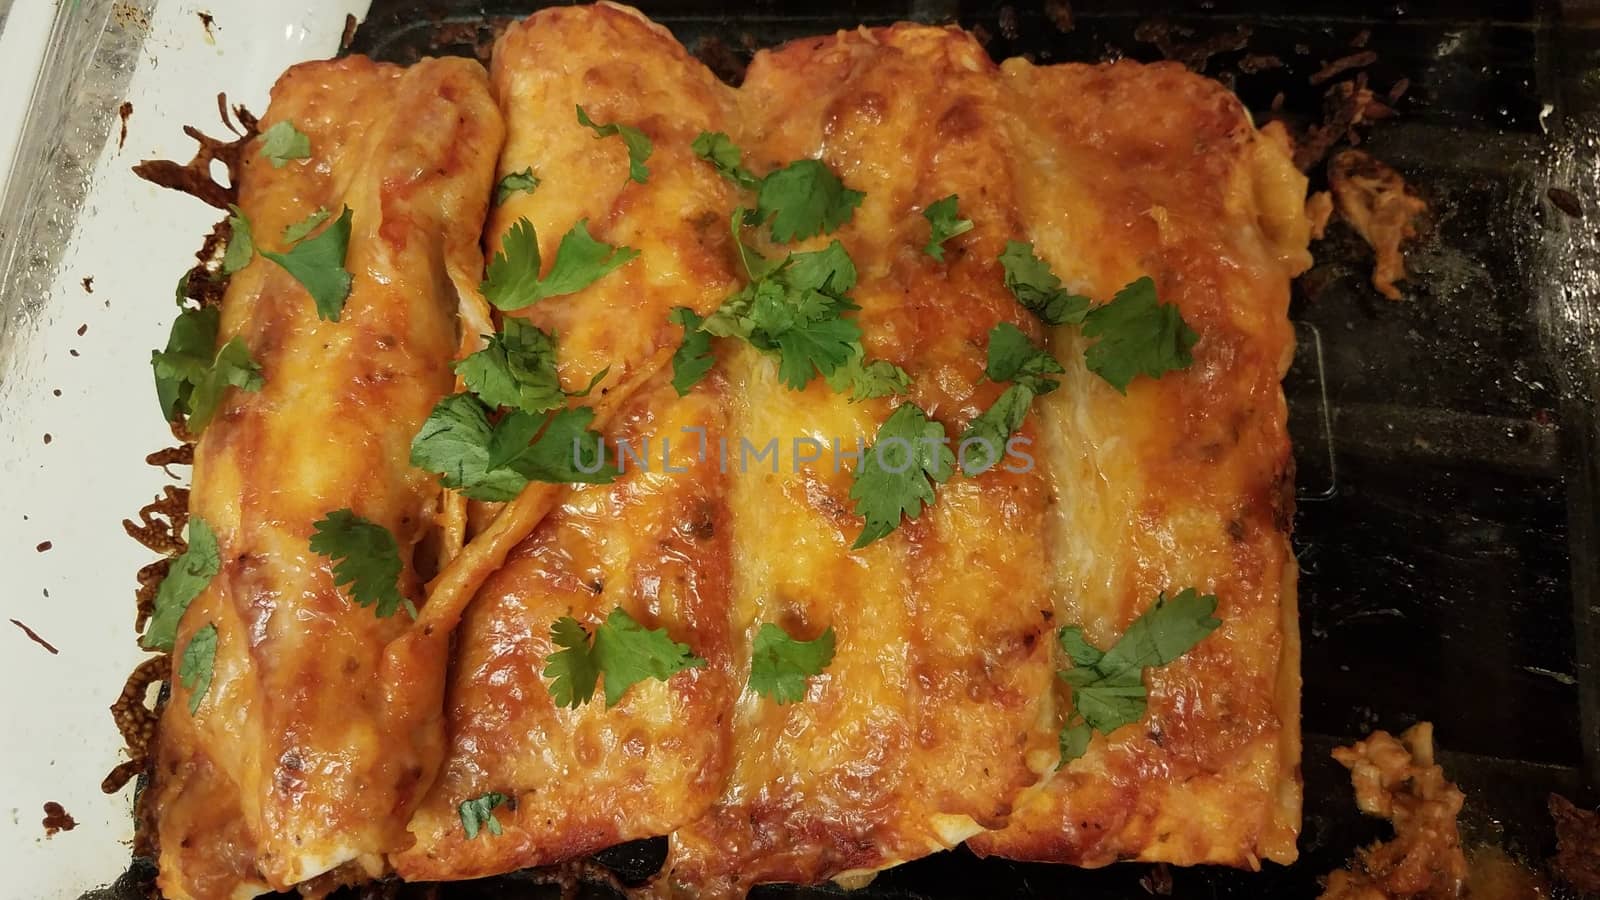 cheesy enchiladas with cilantro in glass container on stove by stockphotofan1